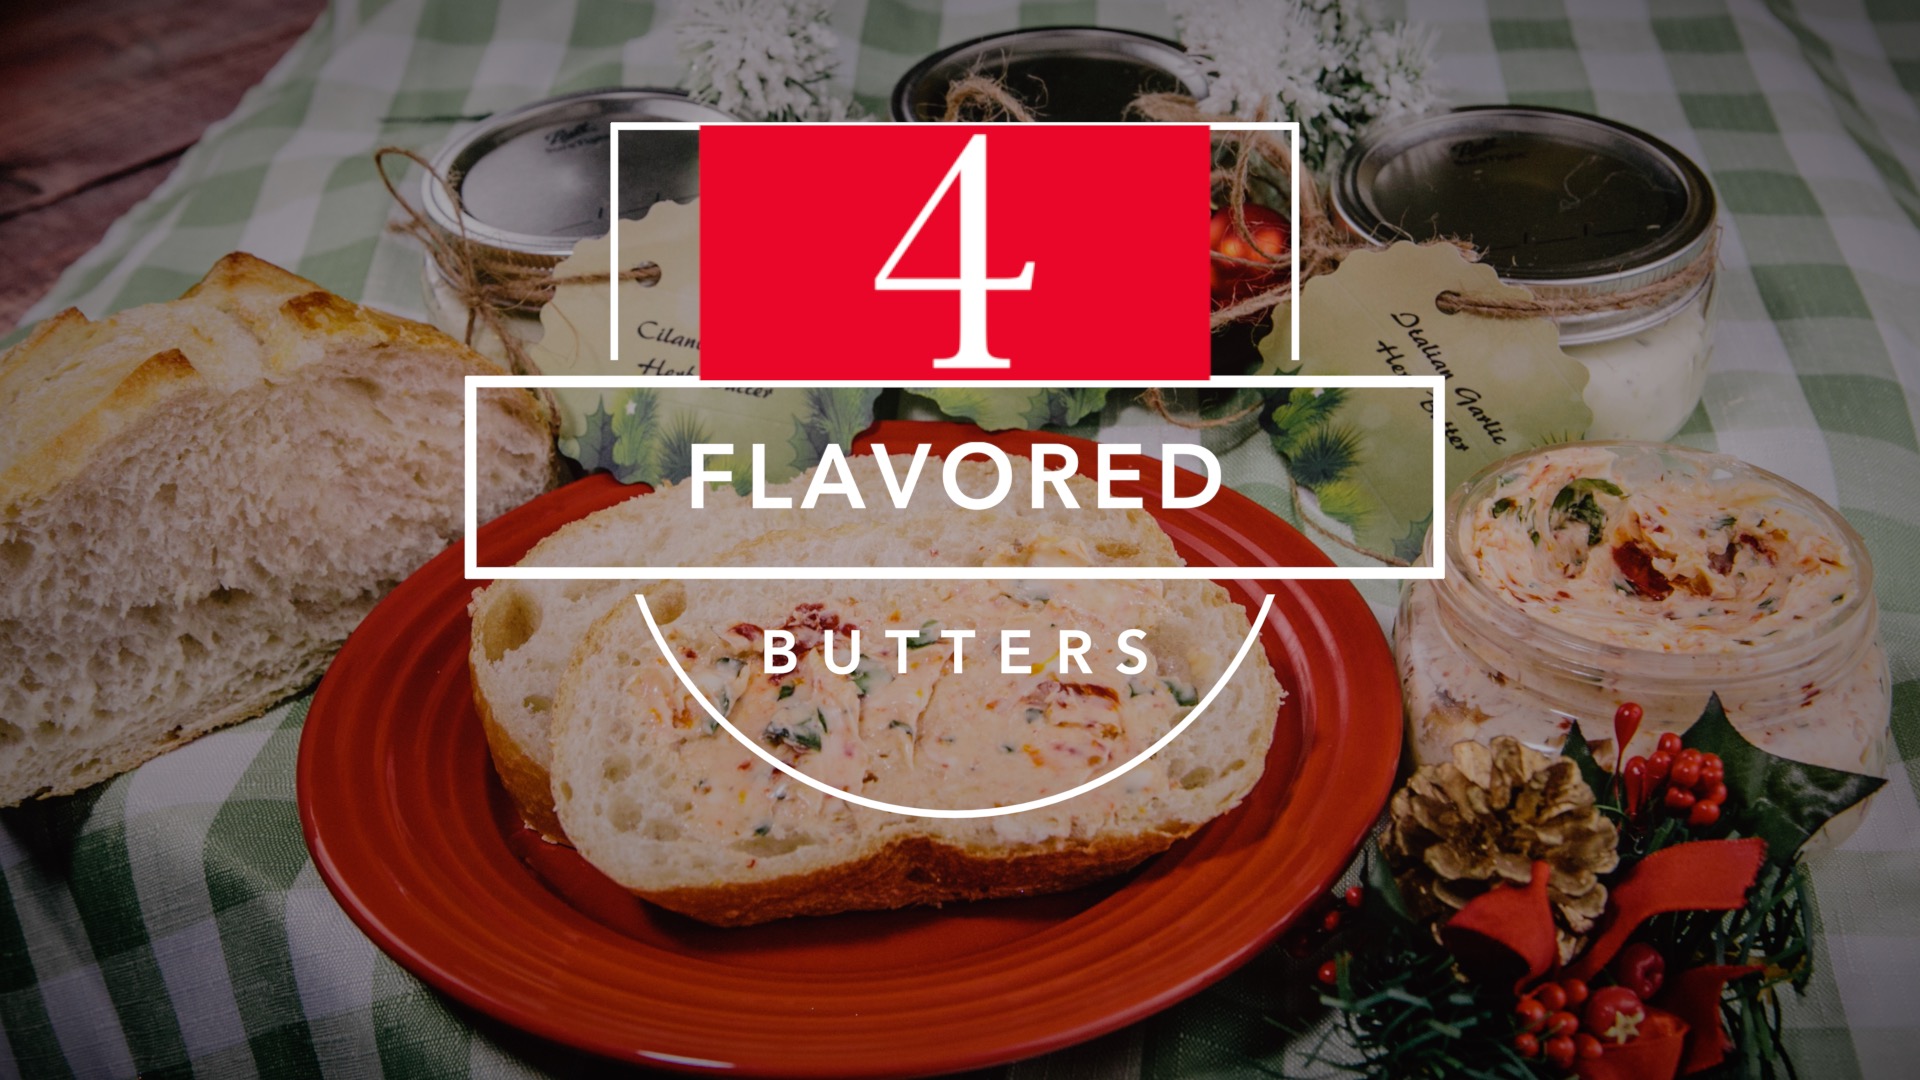 4 Flavored Butters_1920x1080wLogo.jpg